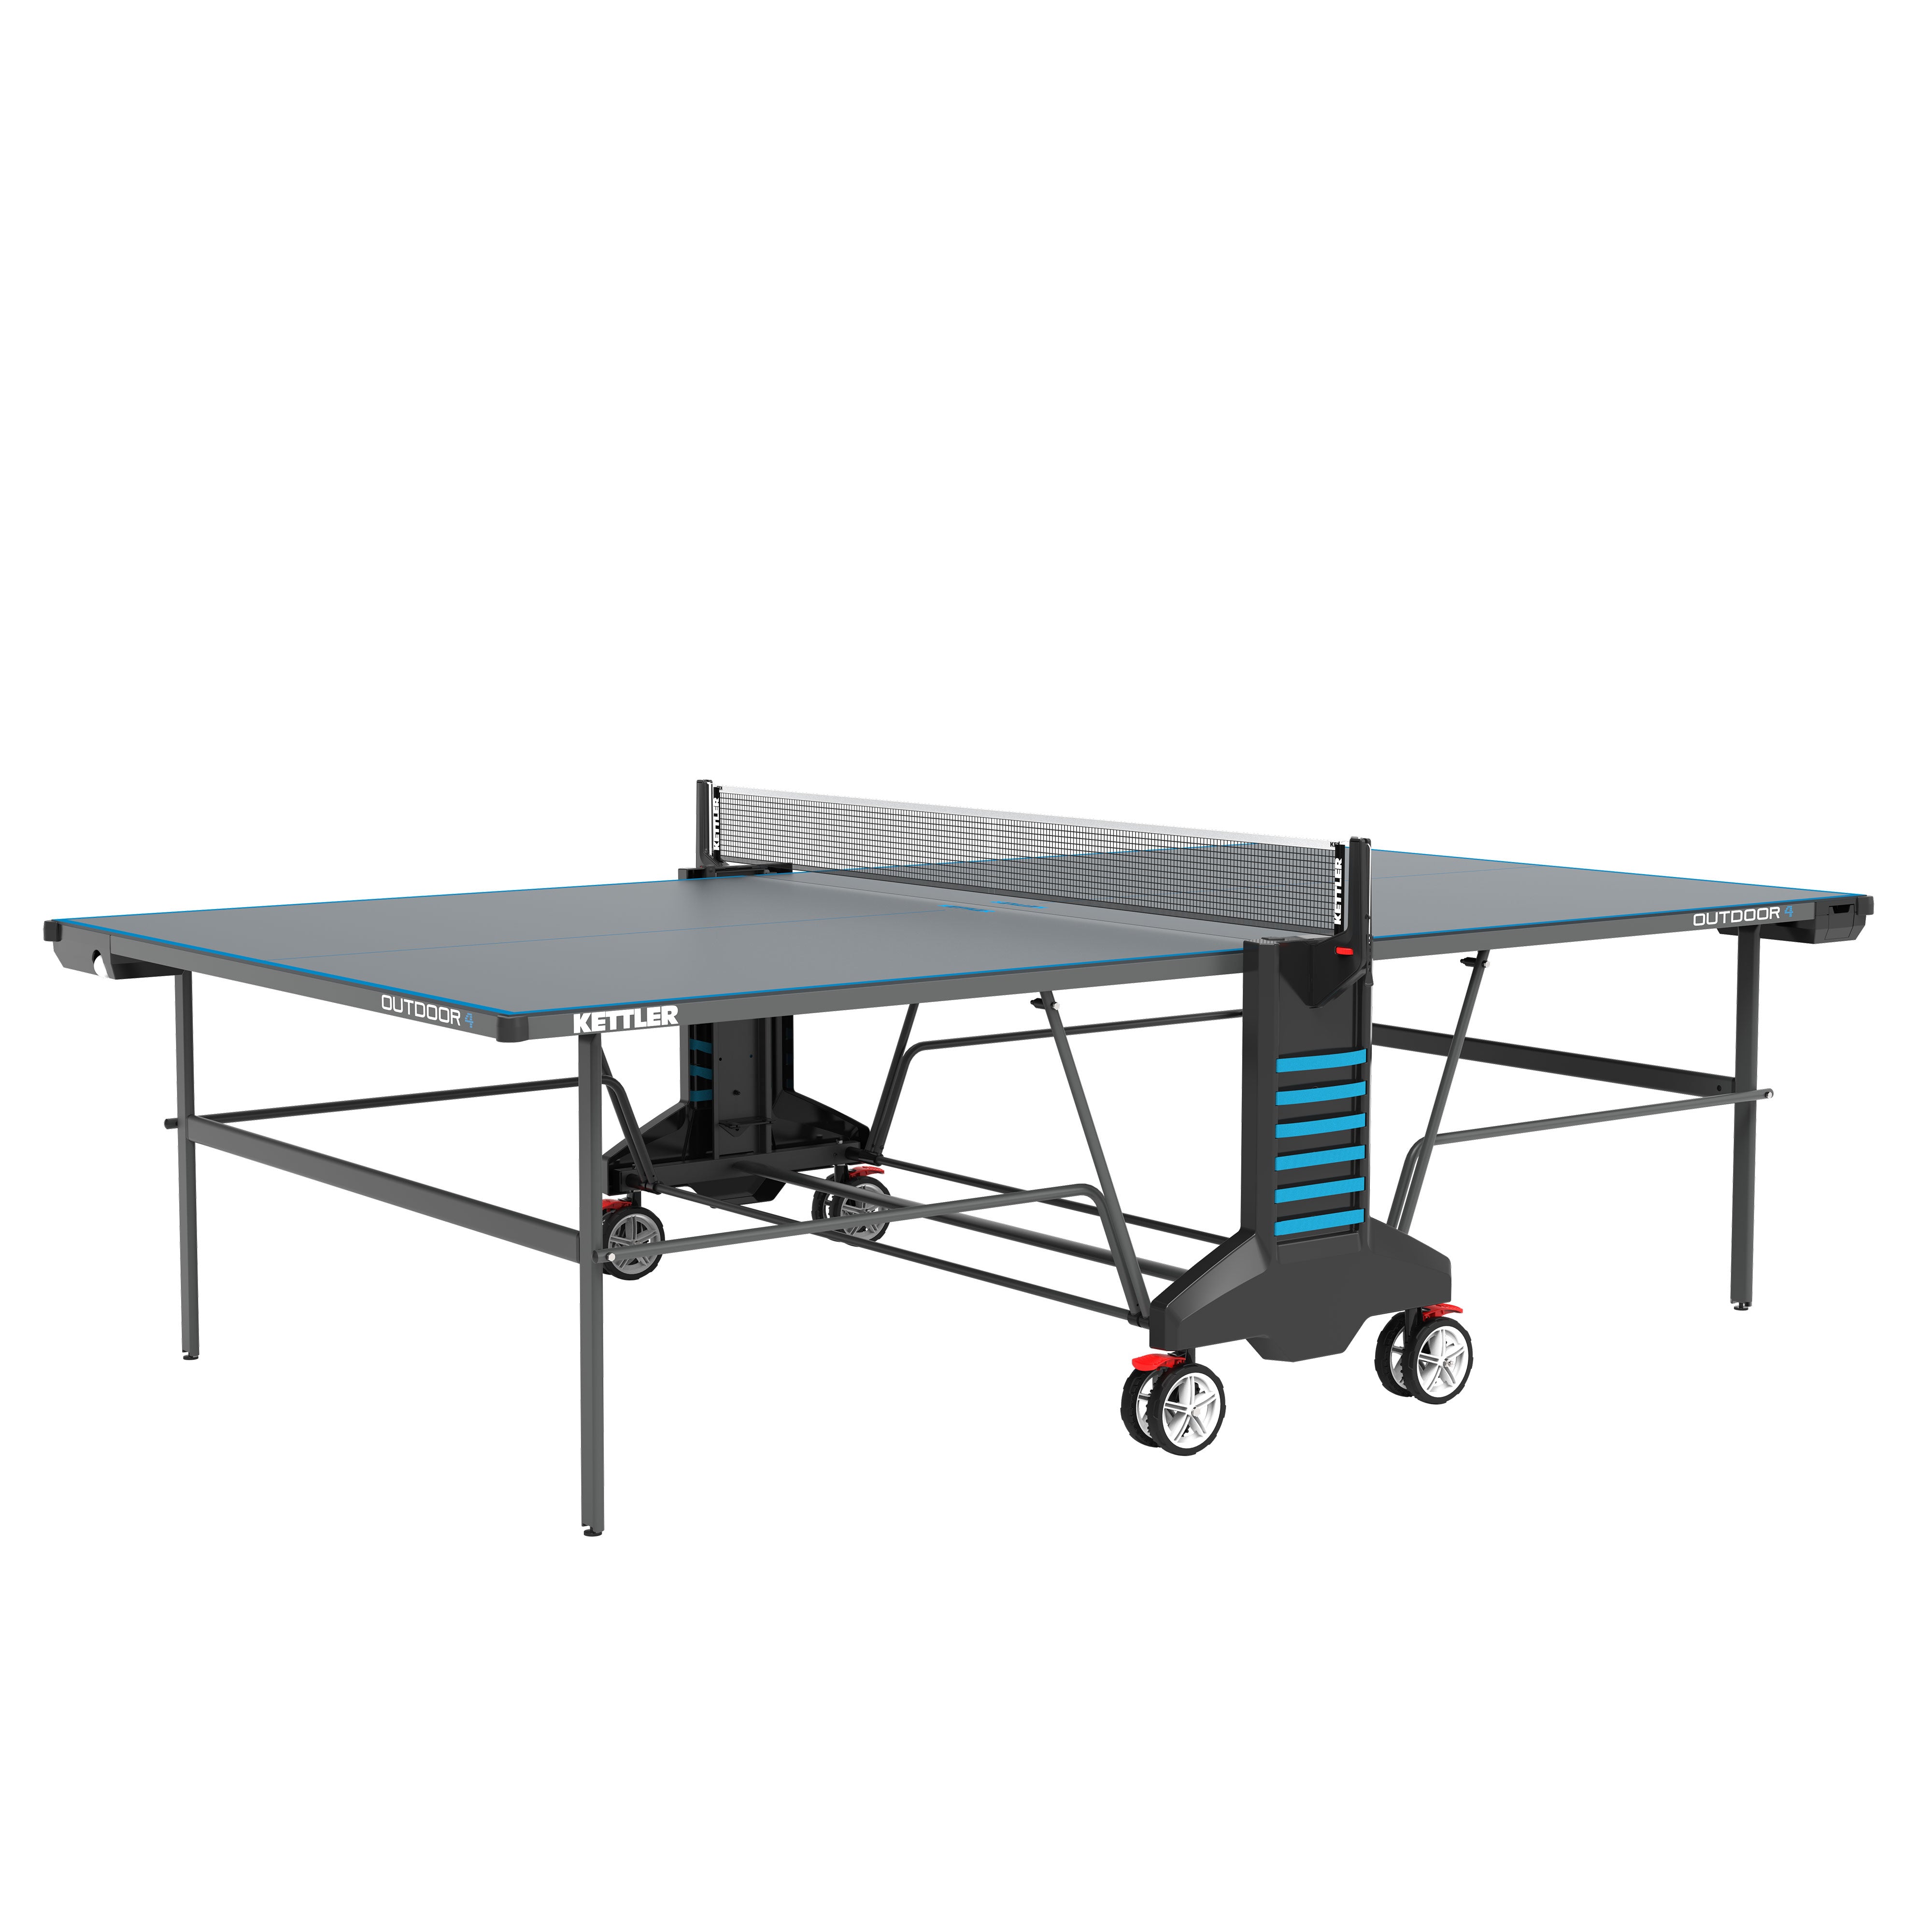 Outdoor 4 Table Tennis Table - 2-Player Bundle